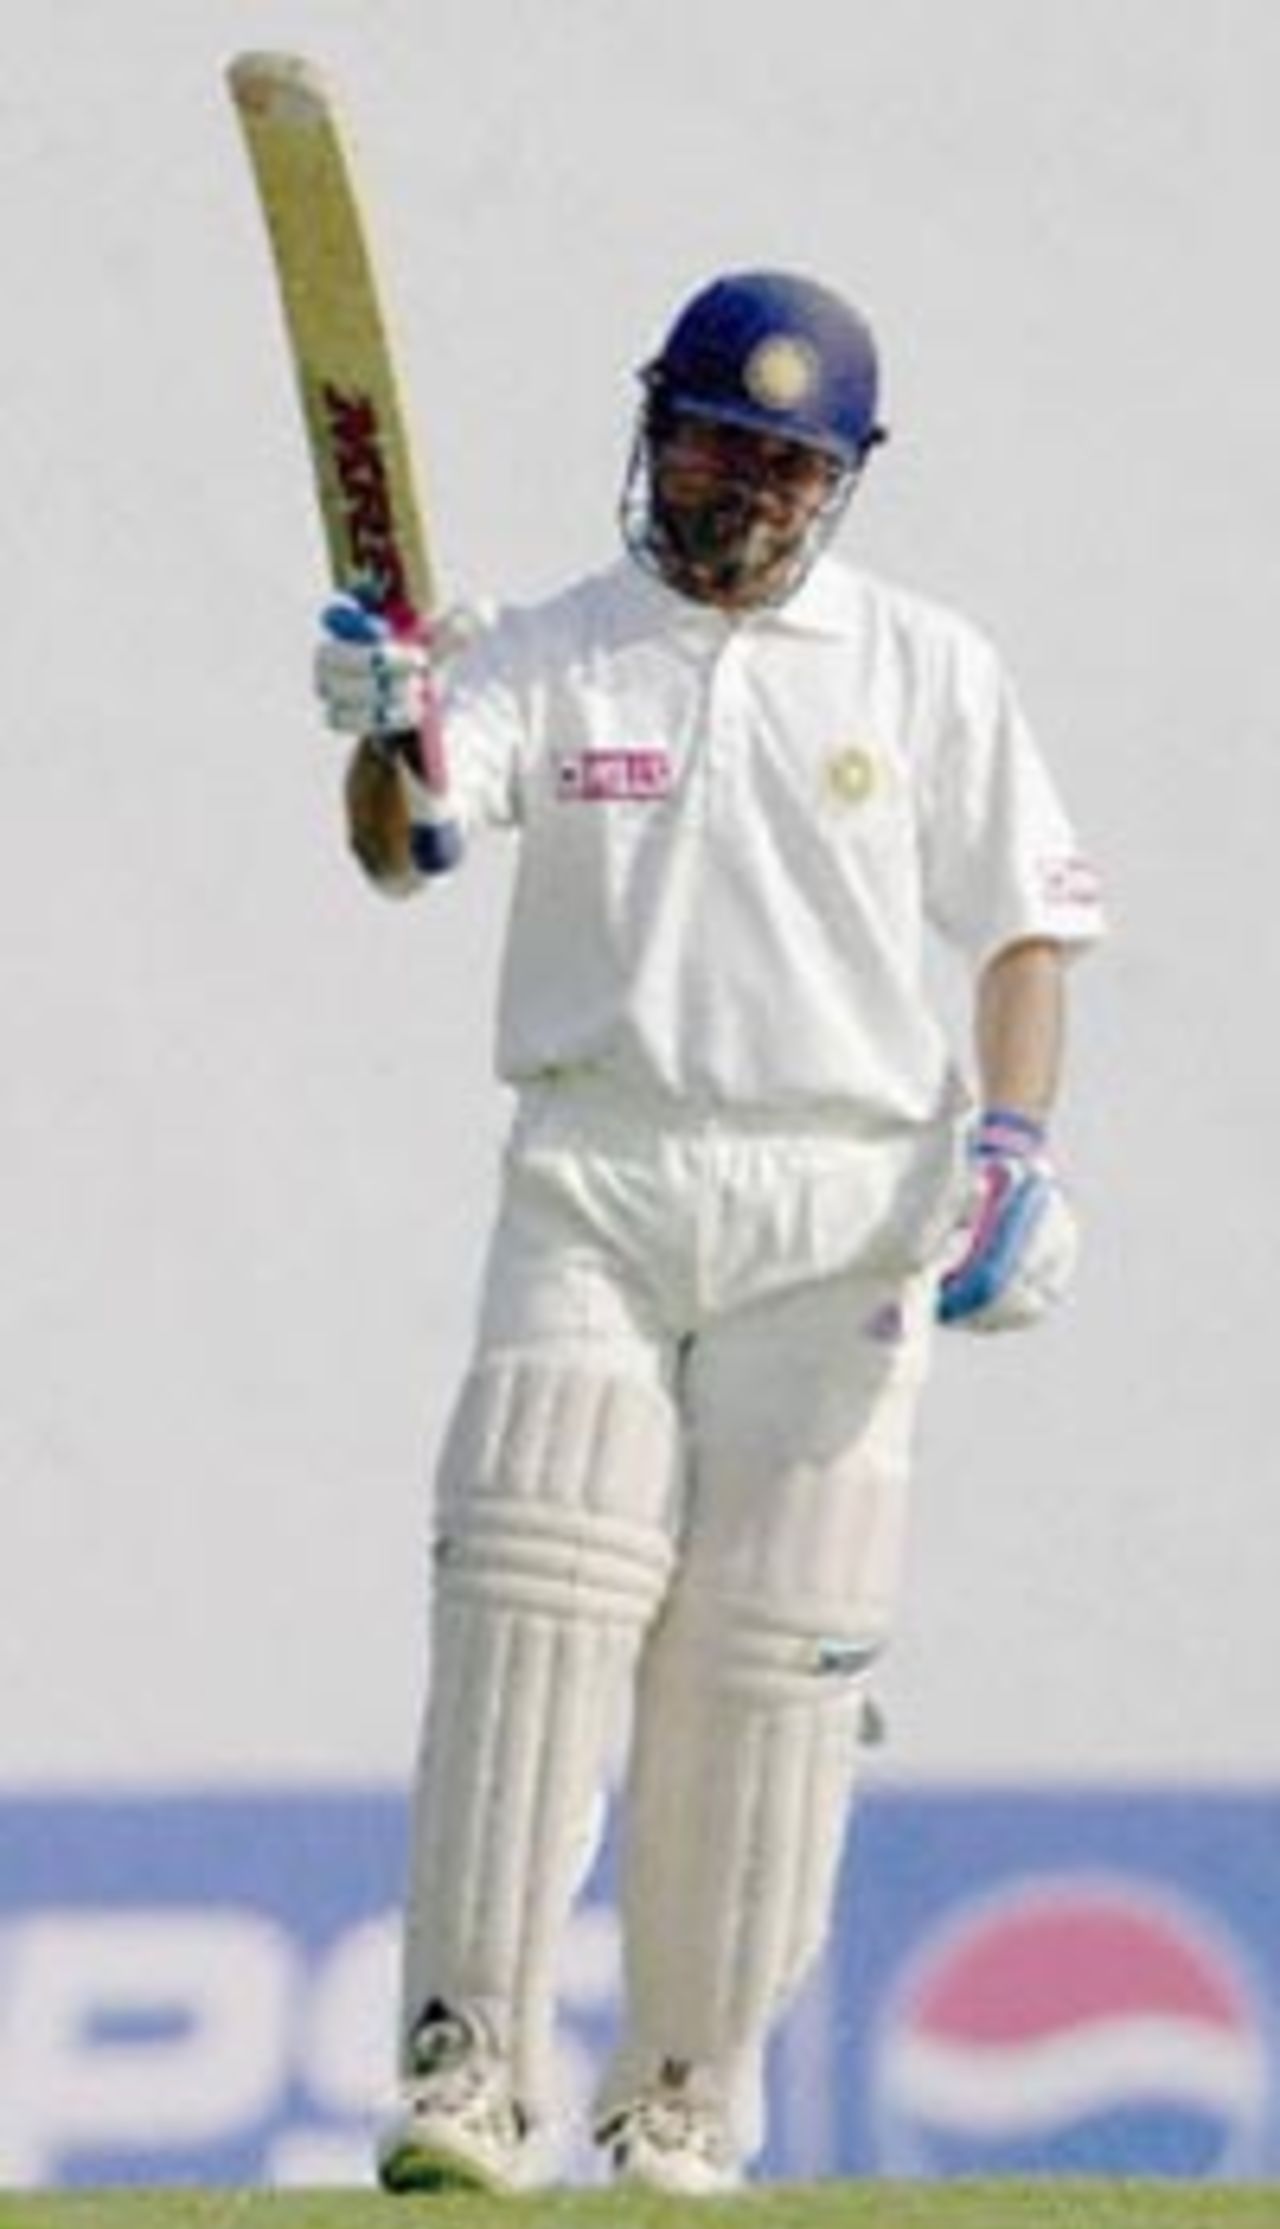 Indian batsman Sachin Tendulkar raises his bat to acknowledge the cheering crowd on the second day of the second test match between India and Zimbabwe 26 November 2000 in Nagpur. Tendulkar was unbeaten on 142 runs as India stood at 463 for two by lunch. India is already 1-0 up in the two-test-series against Zimbabwe.